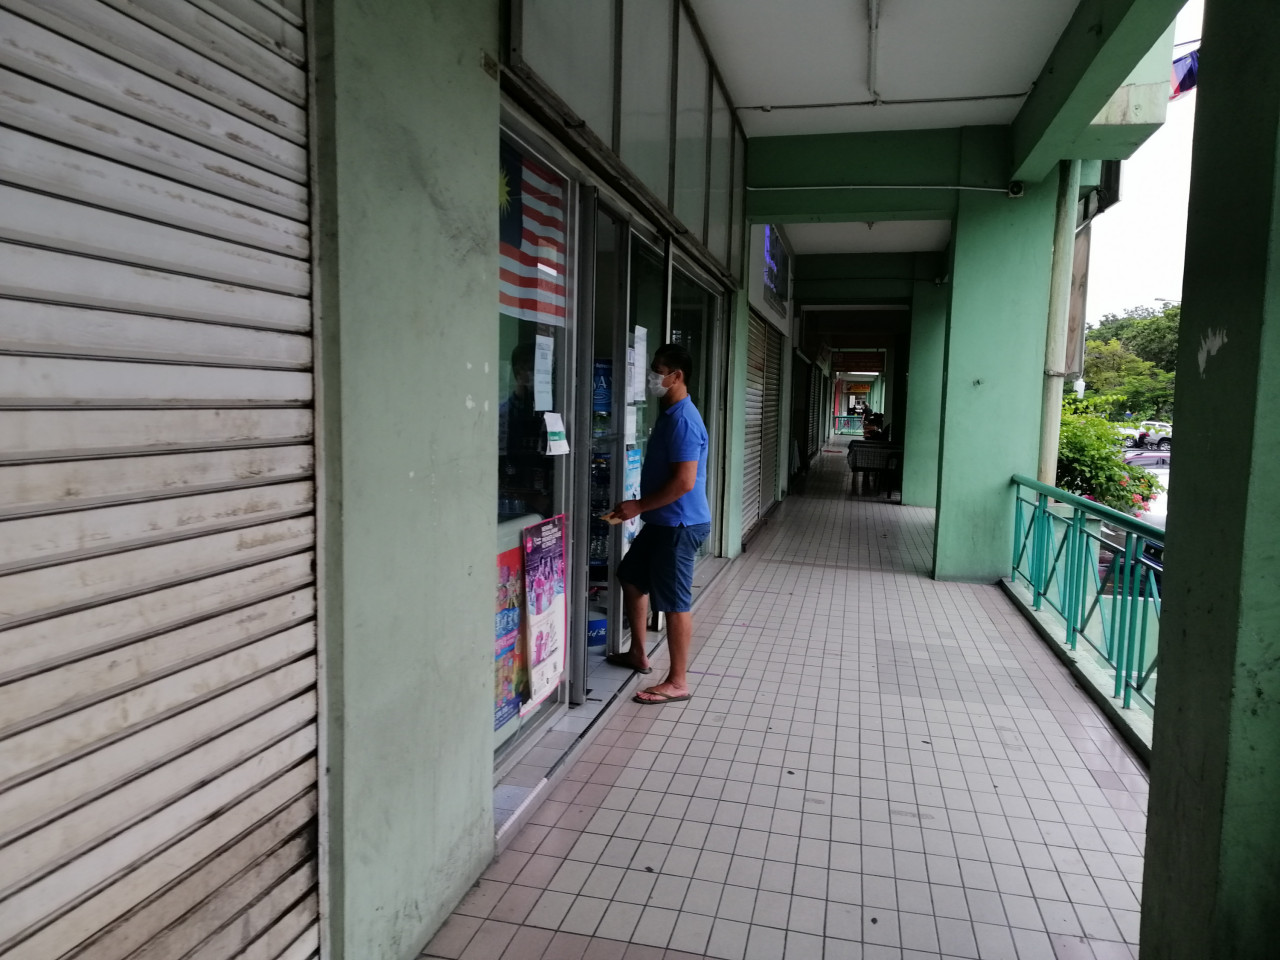 A man buying some groceries from in front of a shop in Kota Kinabalu. – The Vibes pic, October 3, 2020